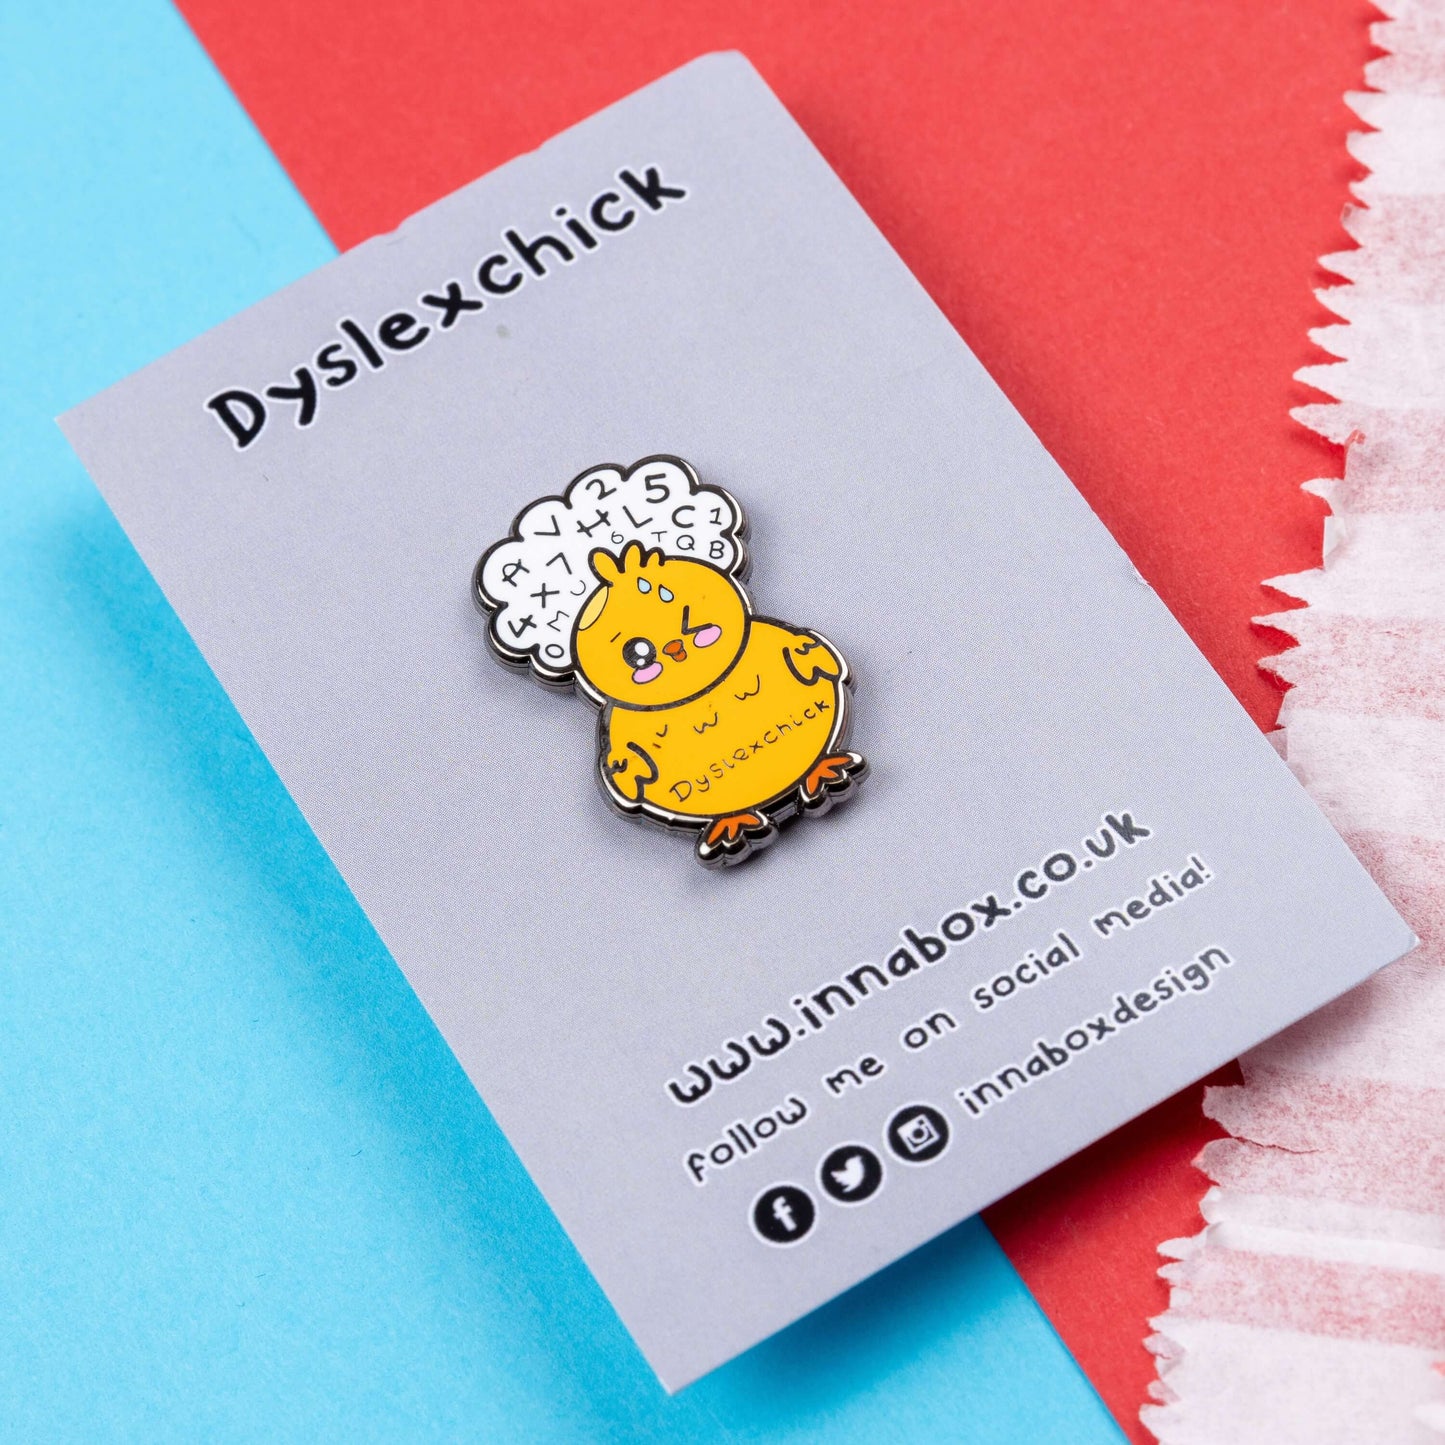 The Dyslexchick Enamel Pin - Dyslexia on grey backing card laid on a red and blue background. A yellow confused chick shaped pin badge with a thought bubble above its head full of letters and numbers with 'dyslexchick' written across its middle. The hand drawn design is raising awareness for dyslexia.